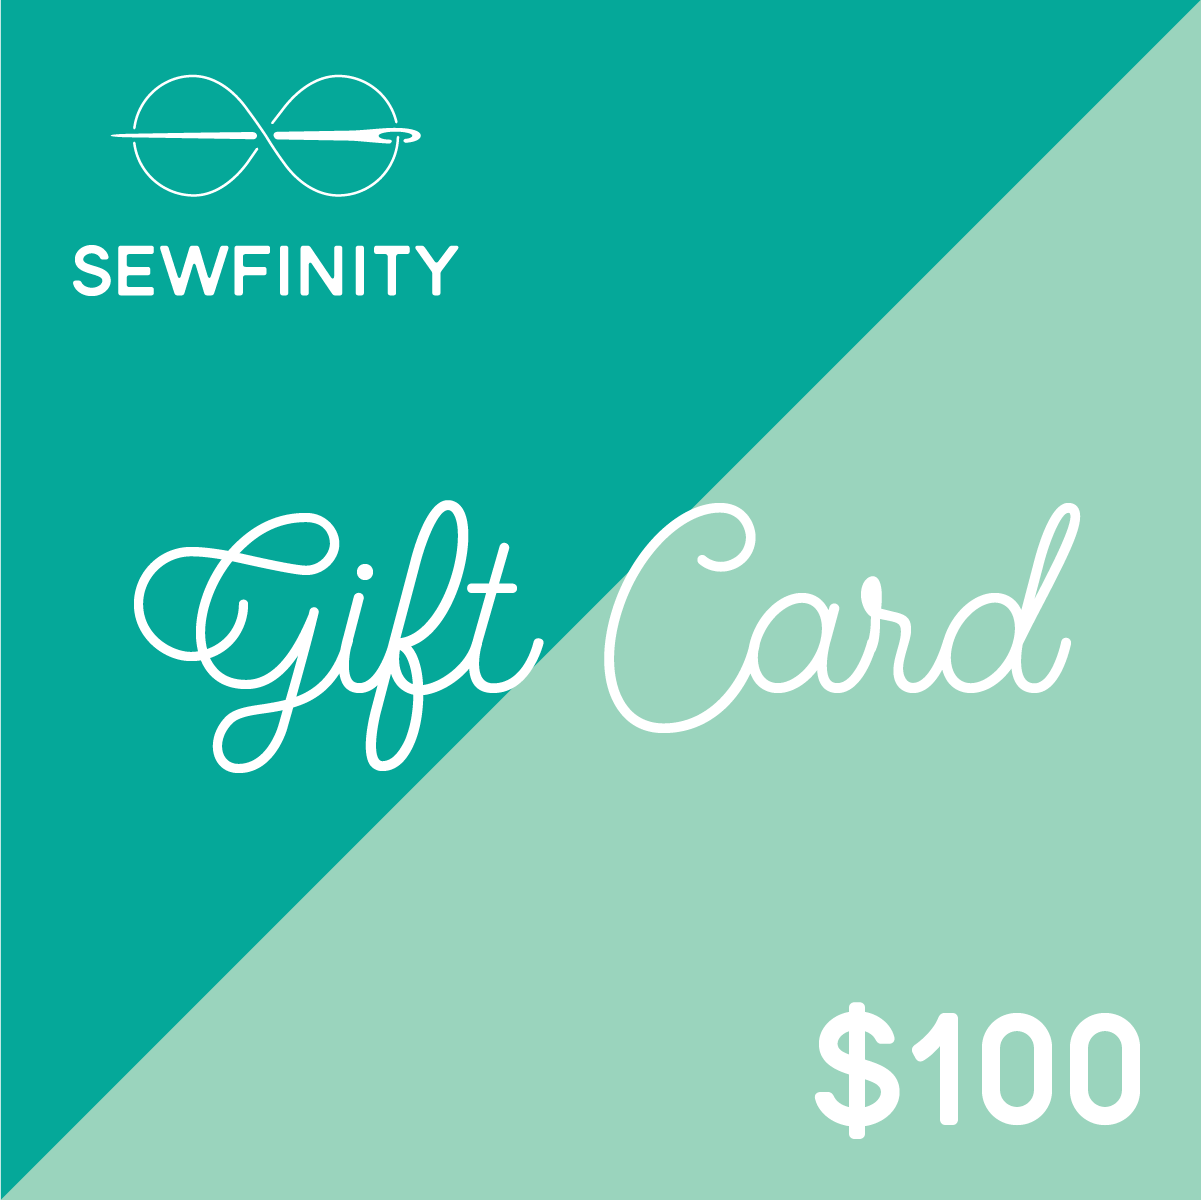 Sewfinity $100 Gift Card